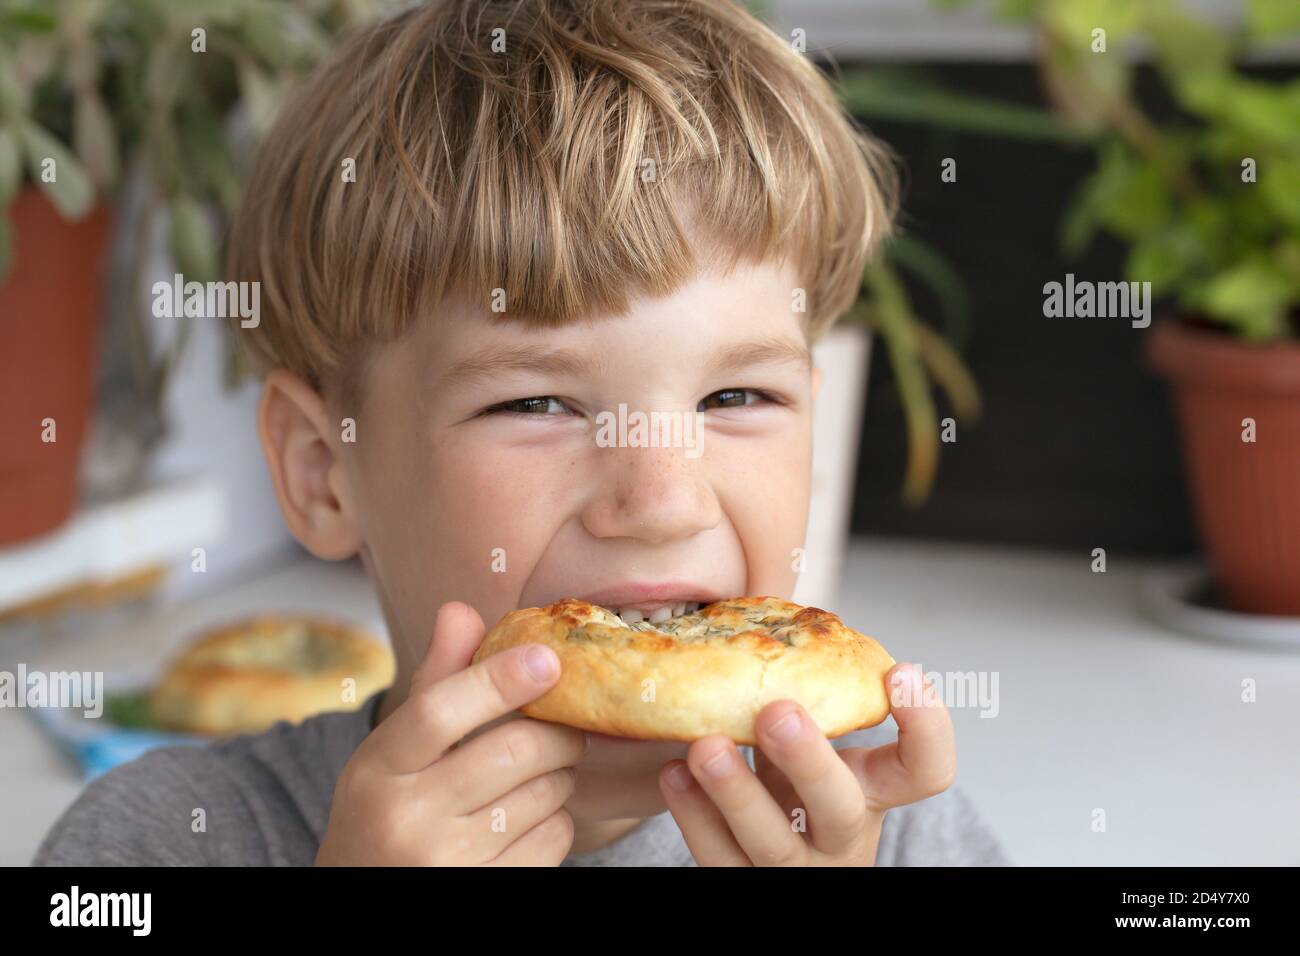 Little boy eating donut. Kid eating unhealthy fast food. Problem is childhood obesity Stock Photo